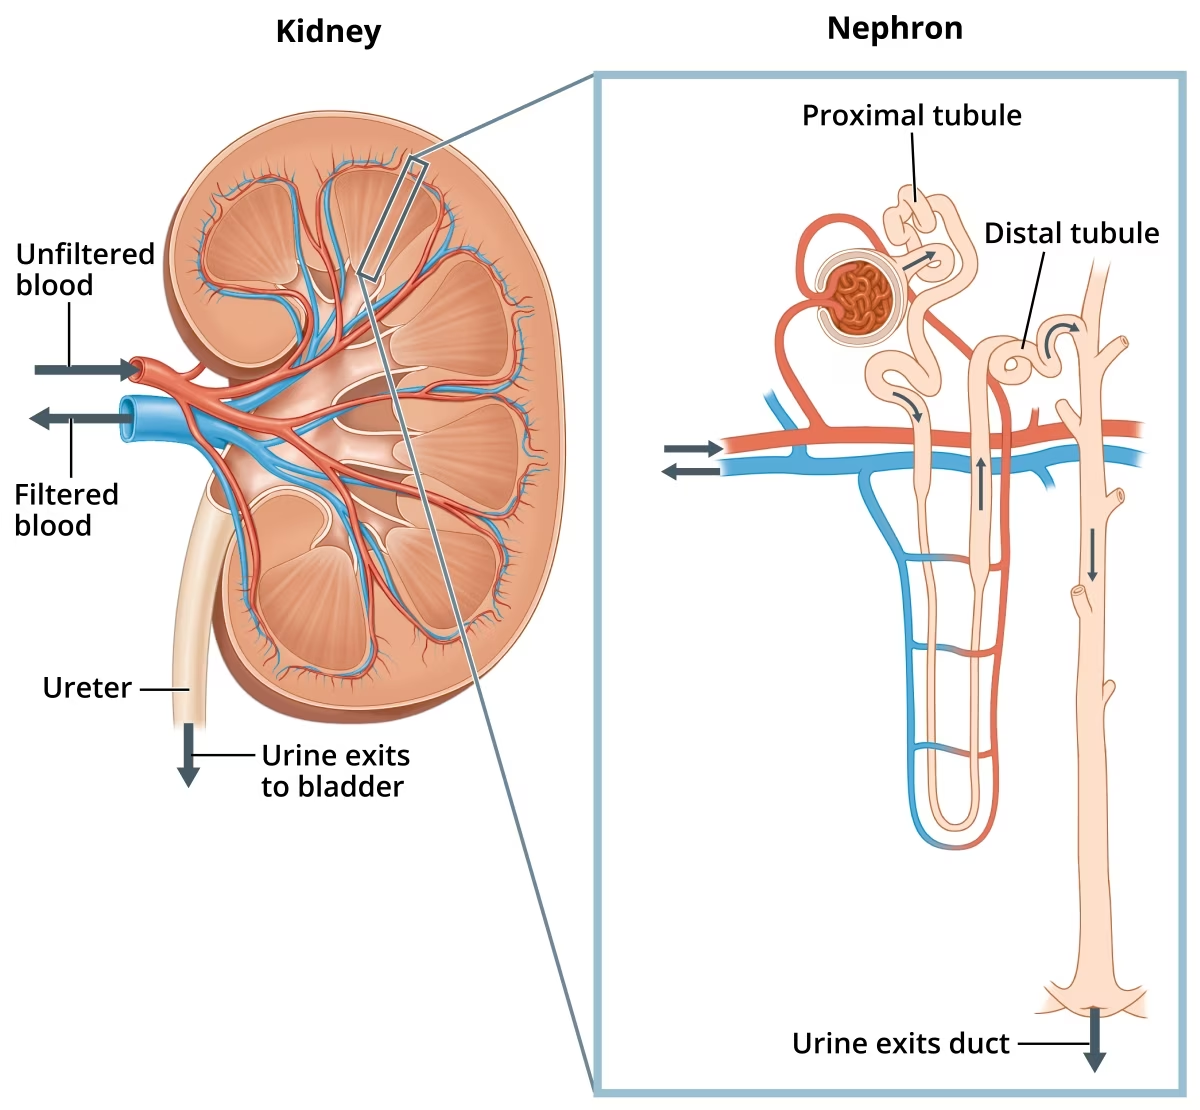 <p>★Tubular secretion of drugs mainly occurs in the proximal tubule (PT) of the kidney.</p>